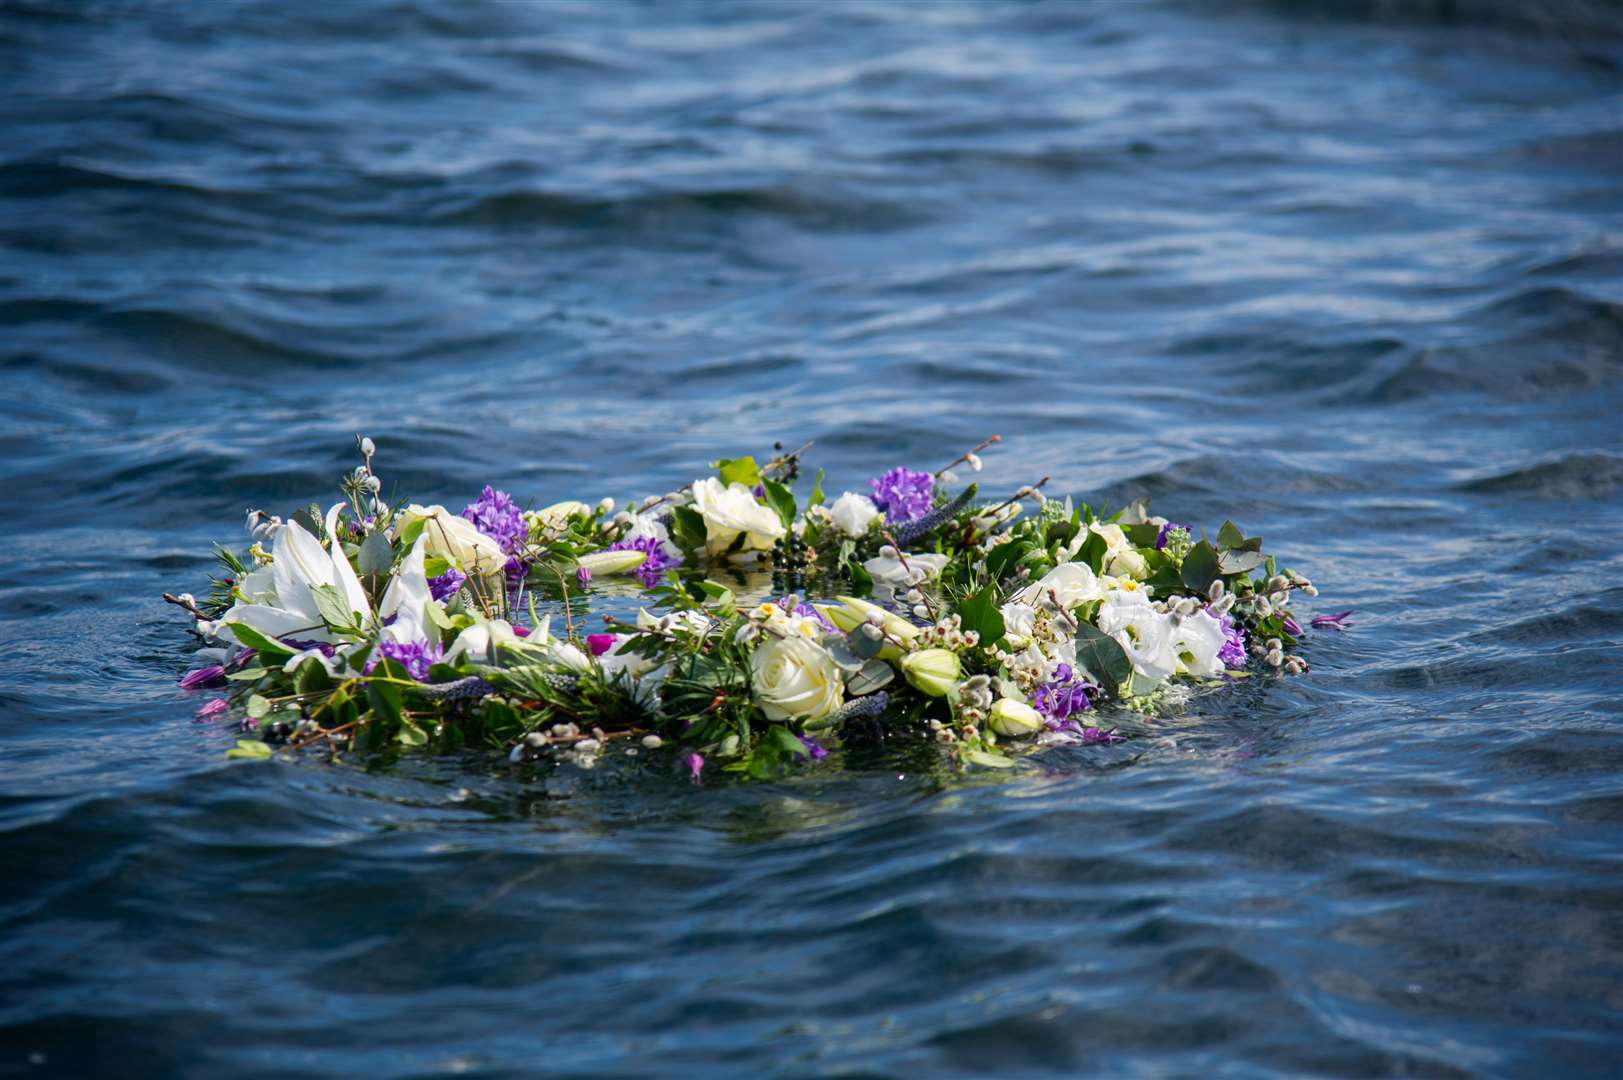 Gordonstoun sailors cast a wreath into the Moray Firth as the culmination to a week of tributes to former pupil Prince Philip. Picture: Becky Saunderson.